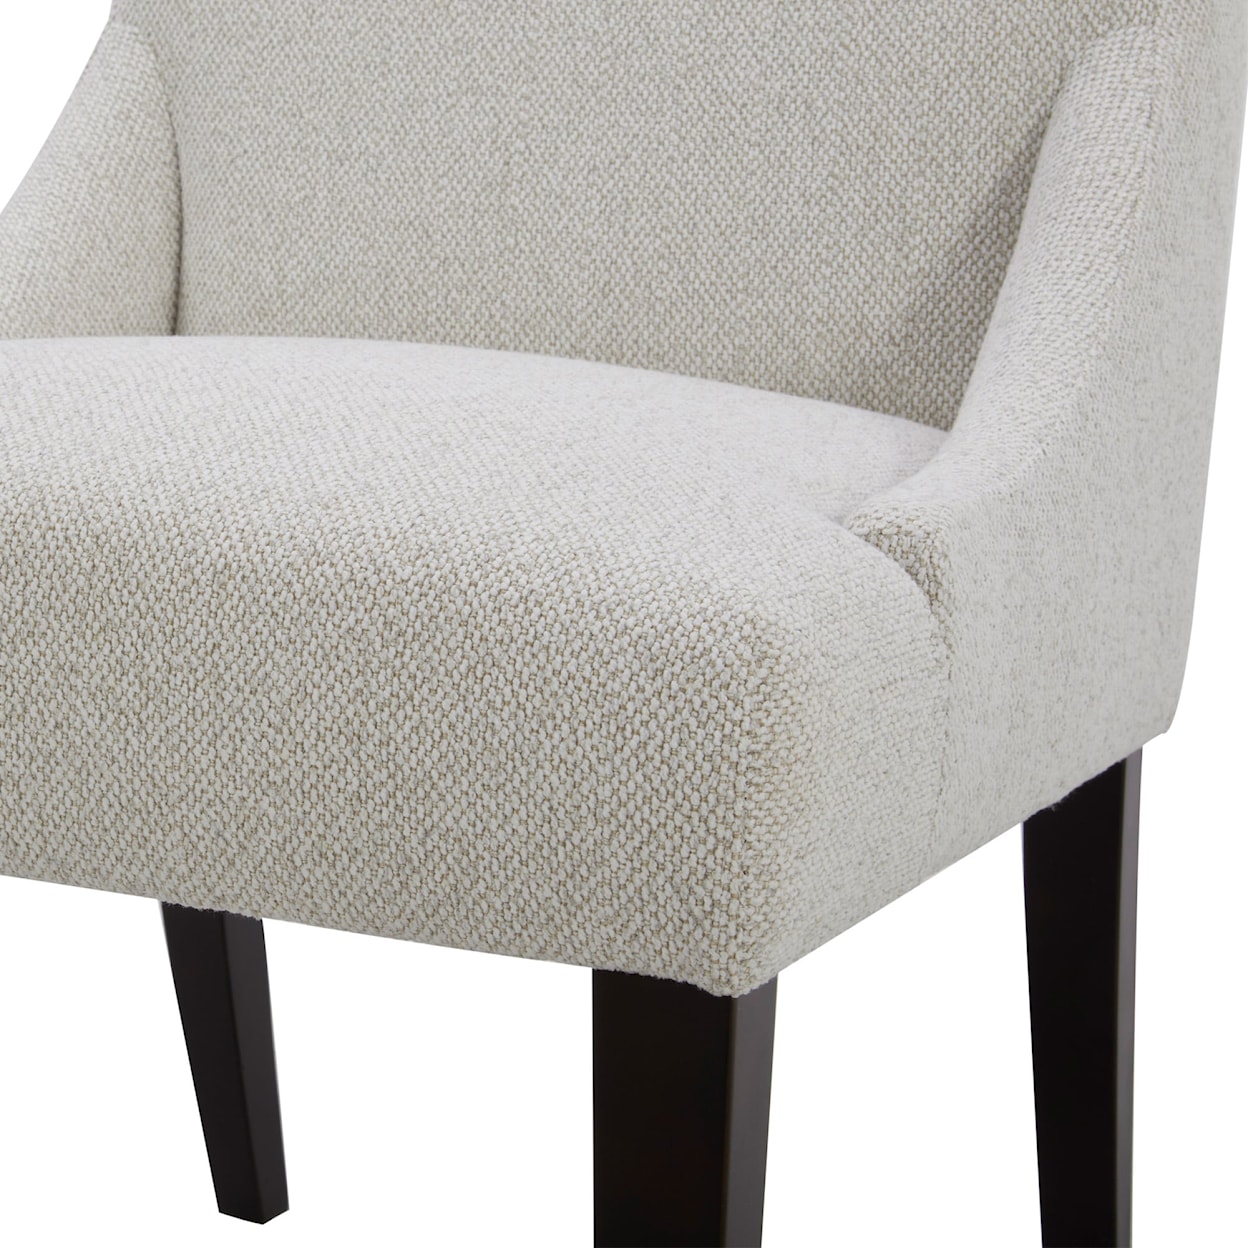 Paramount Furniture Sierra Dining Side Chair